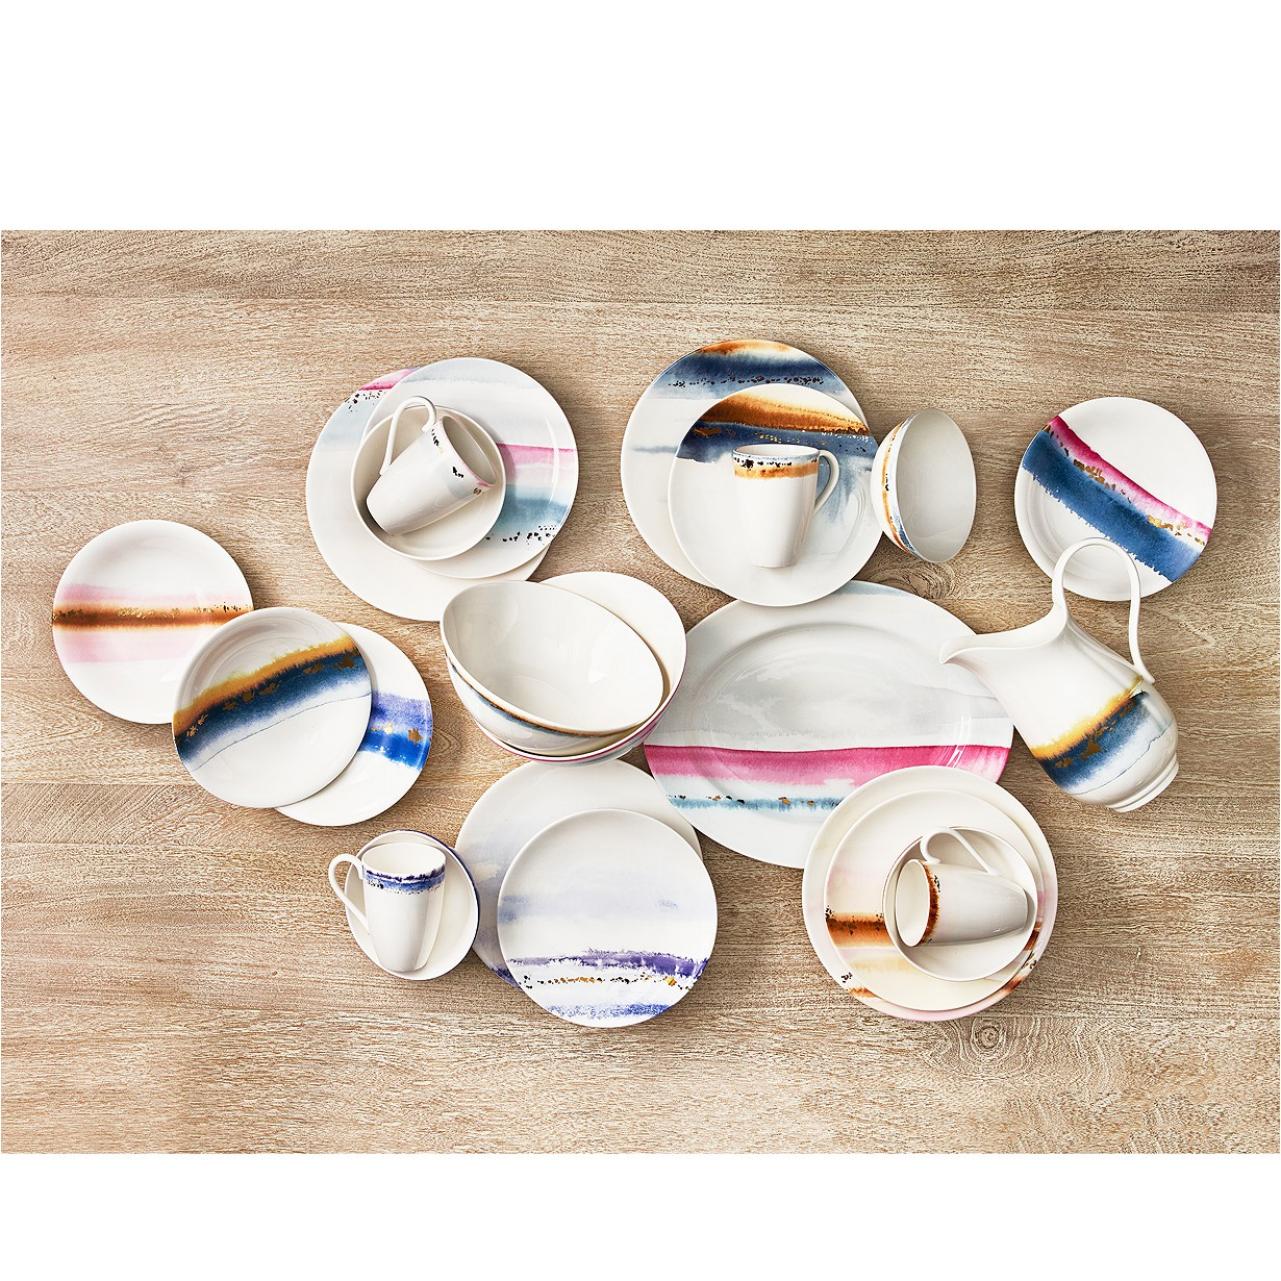 https://food.fnr.sndimg.com/content/dam/images/food/products/2019/3/8/rx_watercolor-horizons-dinnerware-collection-created-for-macys.jpeg.rend.hgtvcom.1280.1280.suffix/1552063336988.jpeg